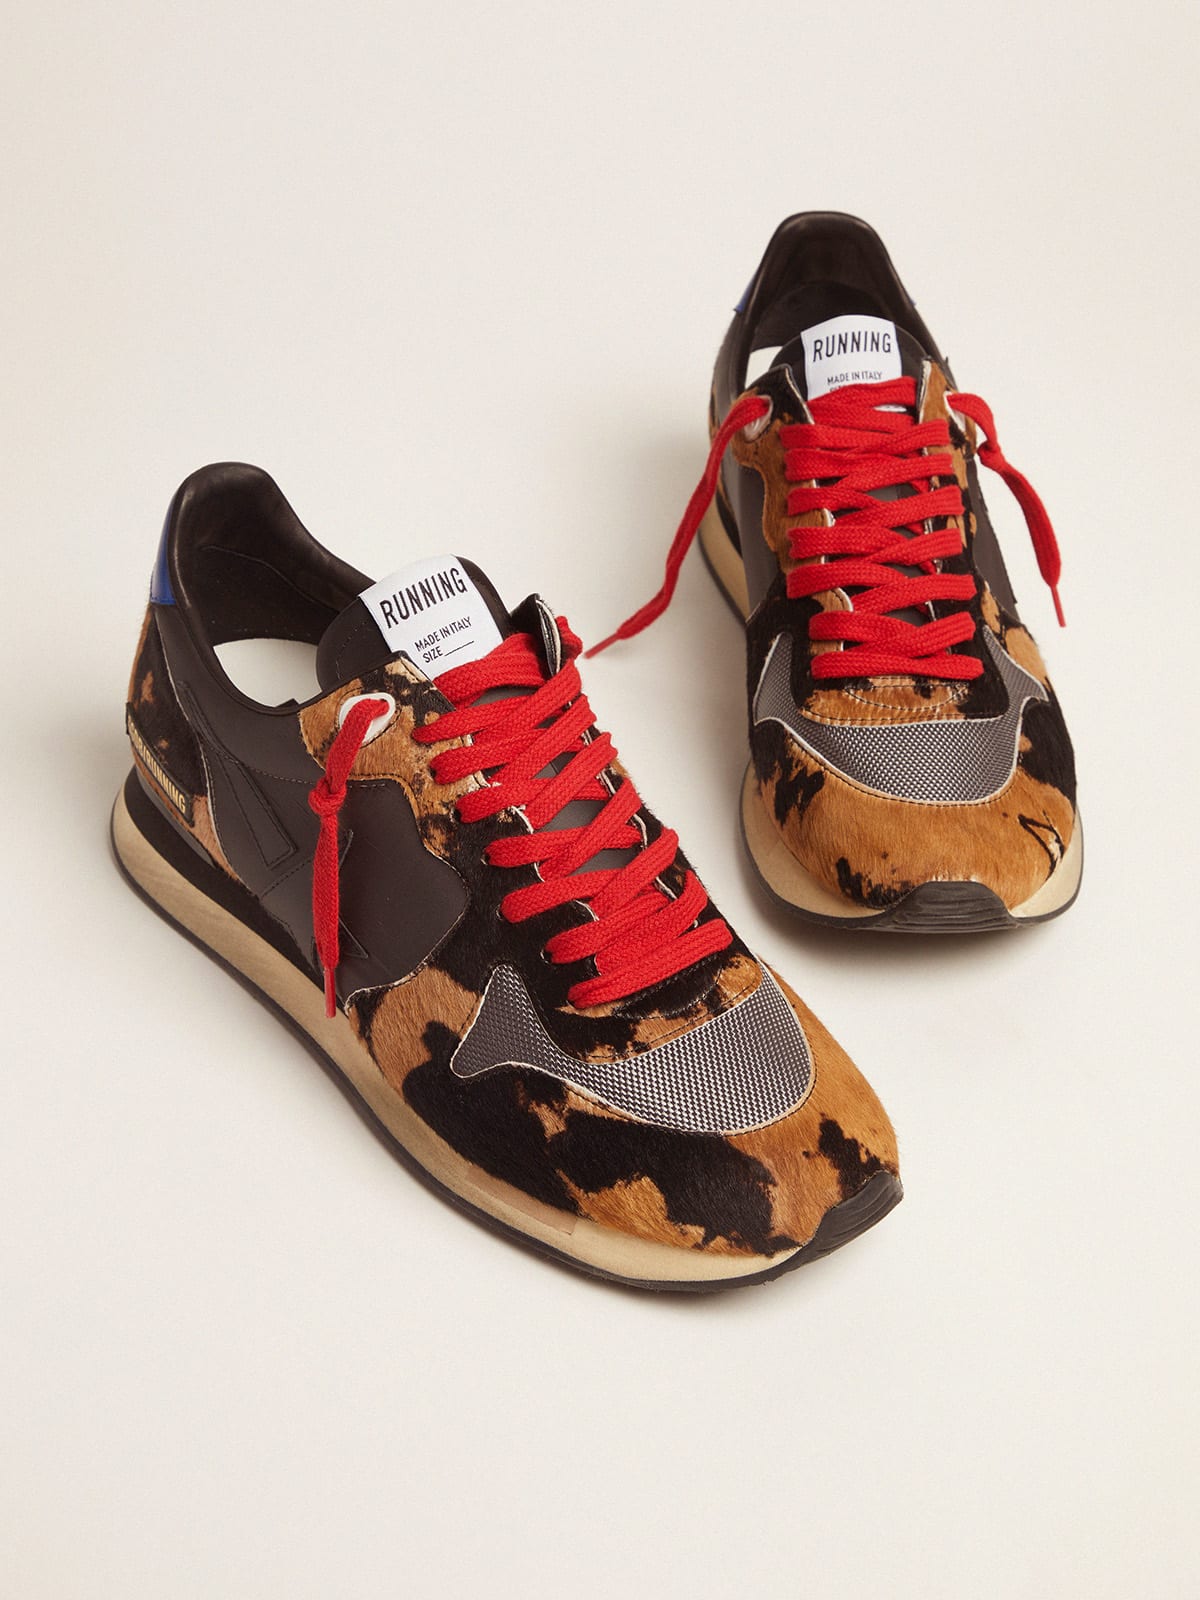 Golden Goose - Running Sneakers with pony skin and textured nylon inserts in 